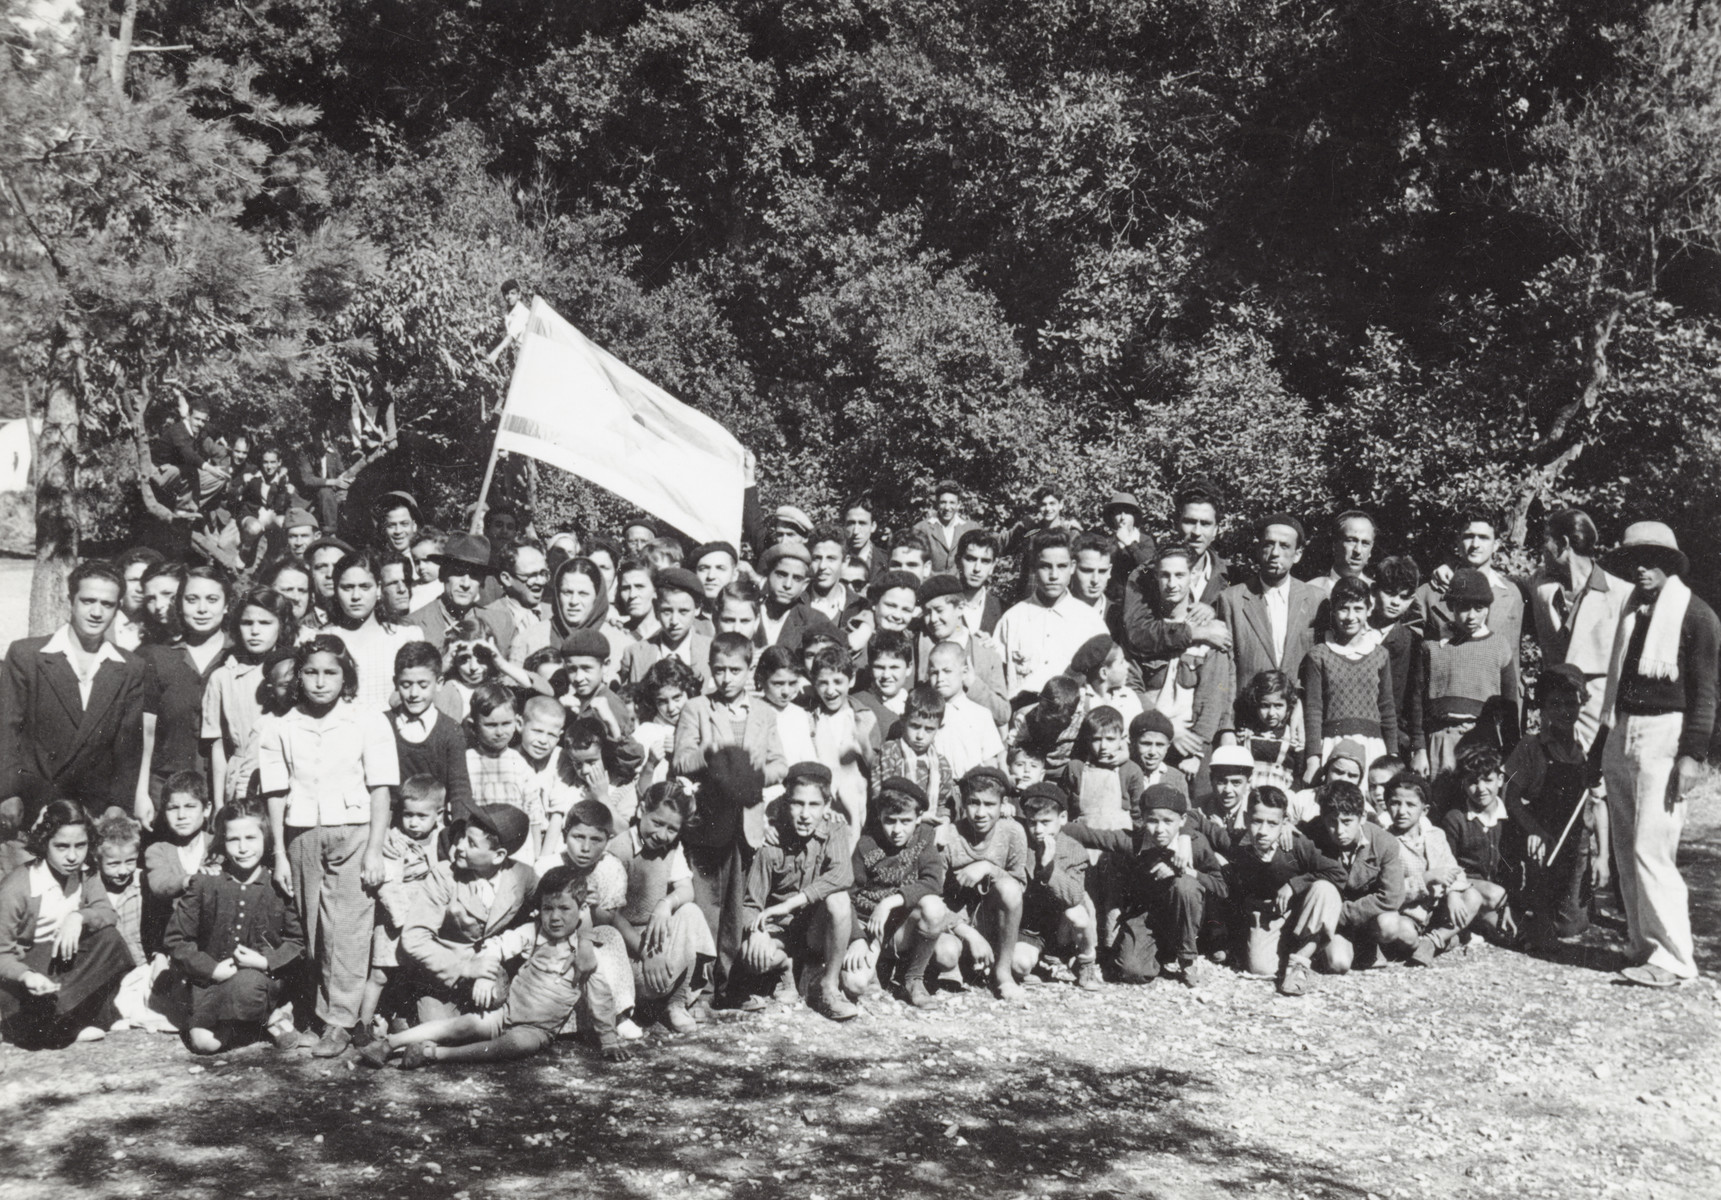 Group portrait of Jewish children in Marseilles waiting to go to Israel.